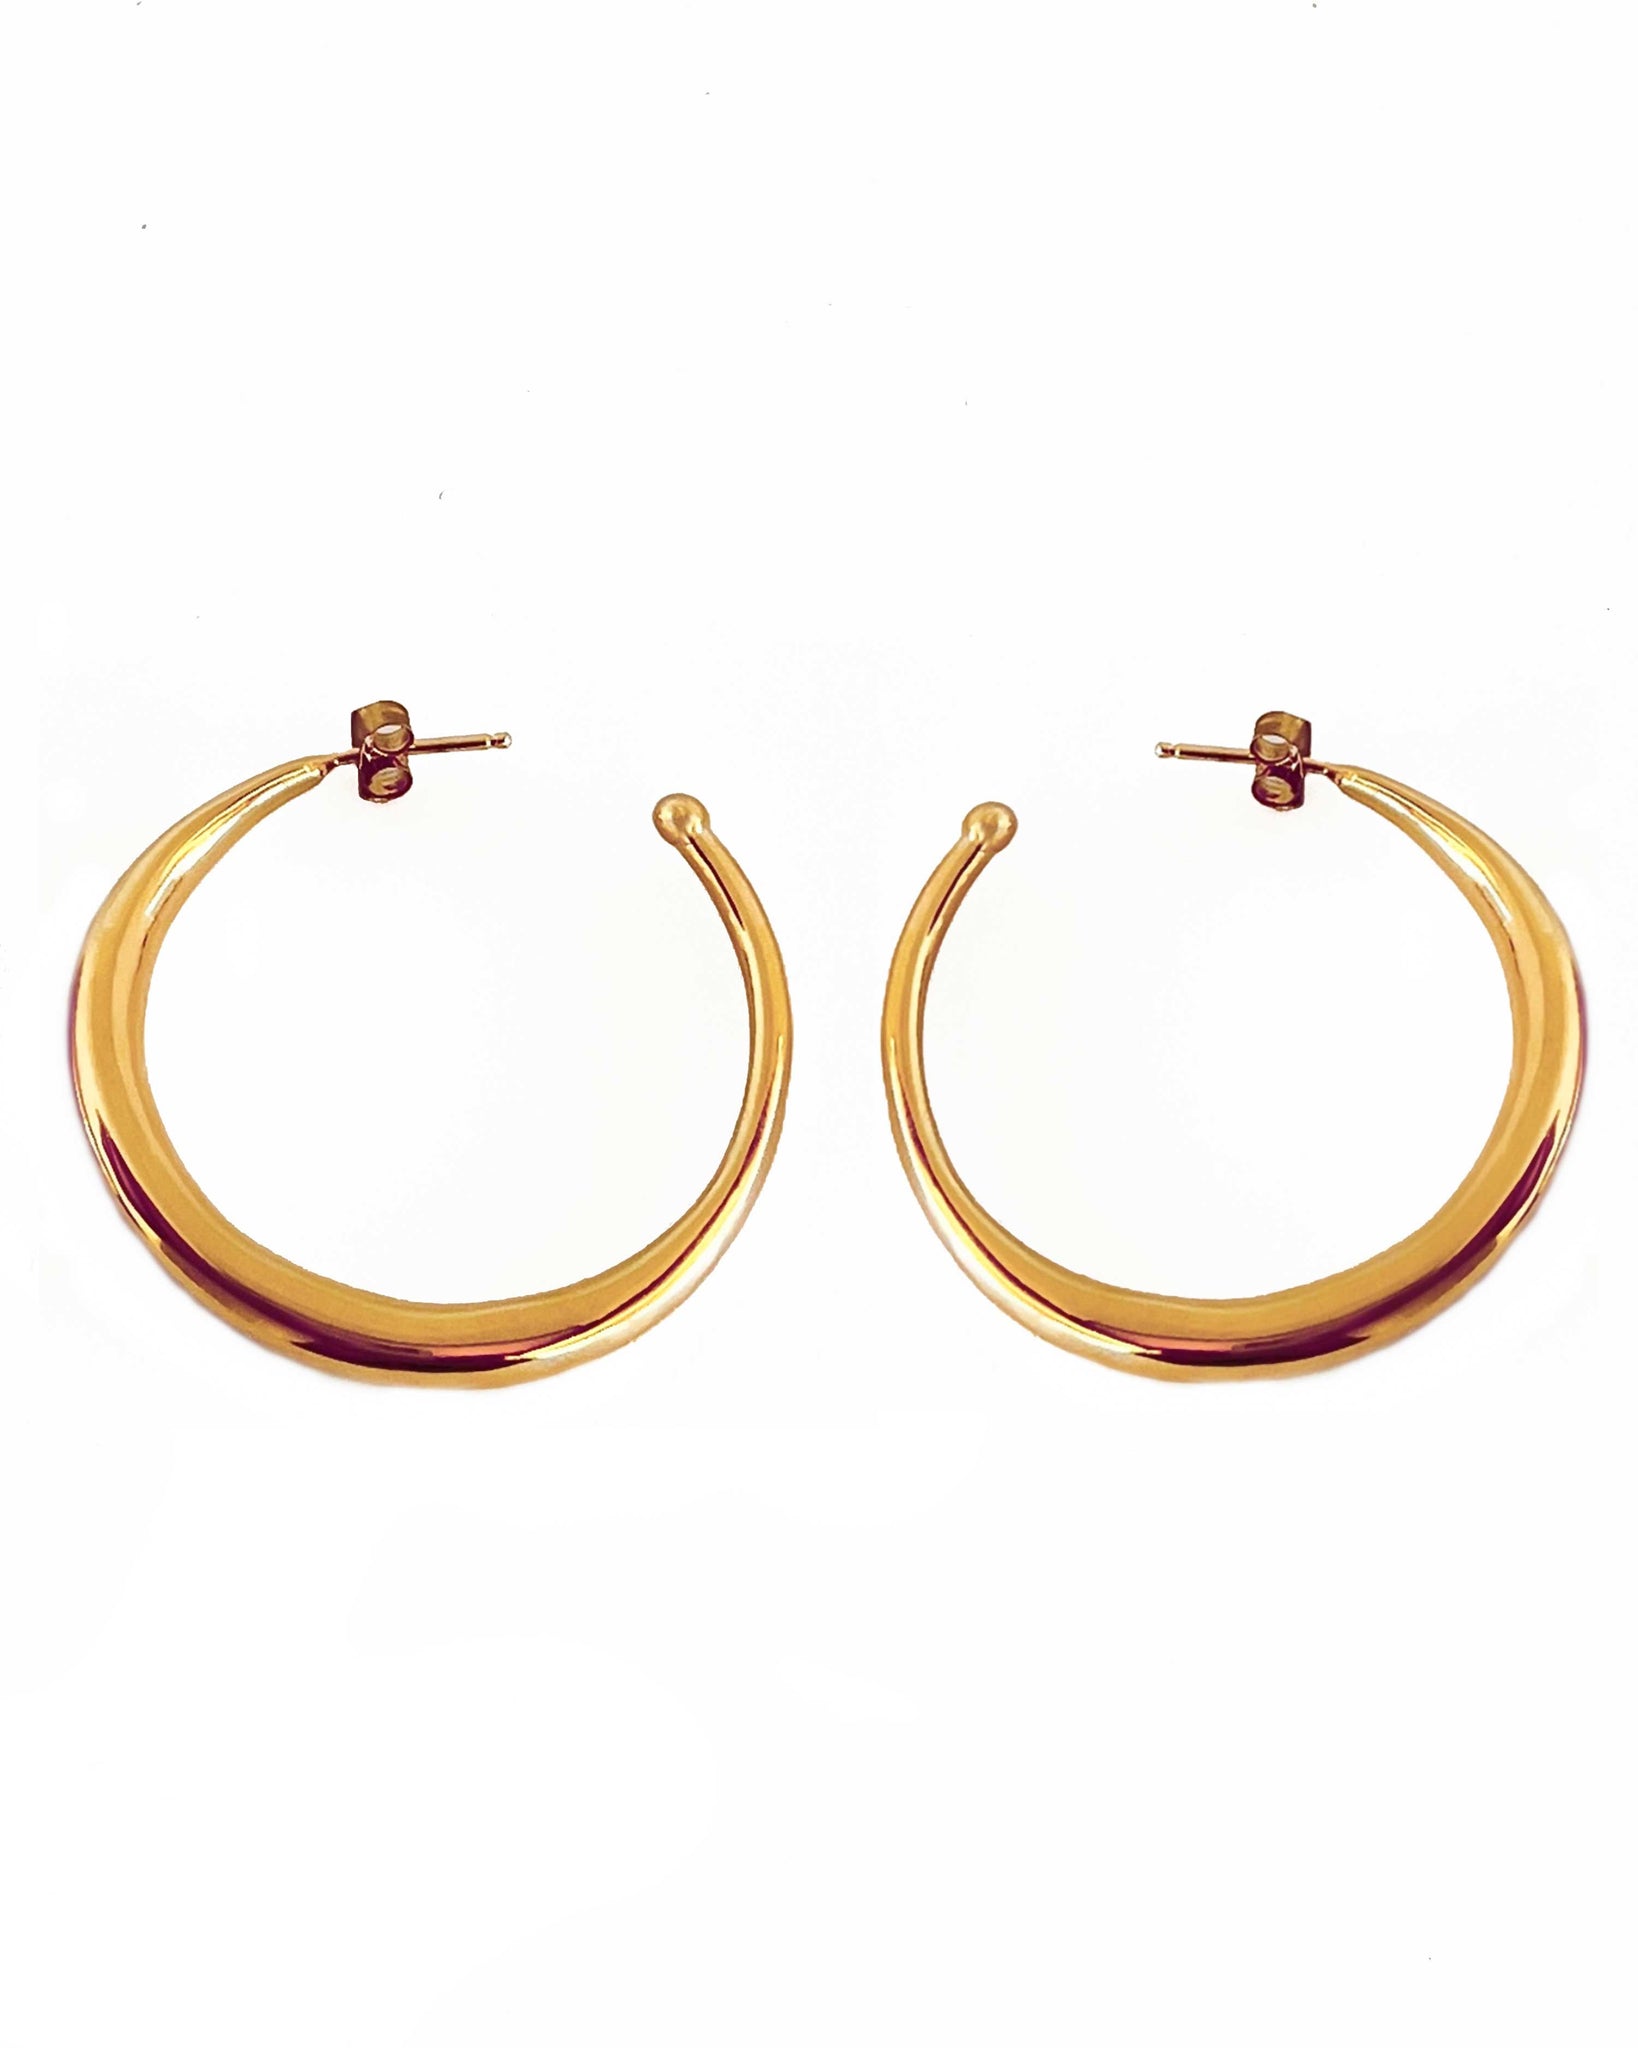 THICK ROUNDED HOOP EARRINGS – Kendall Conrad